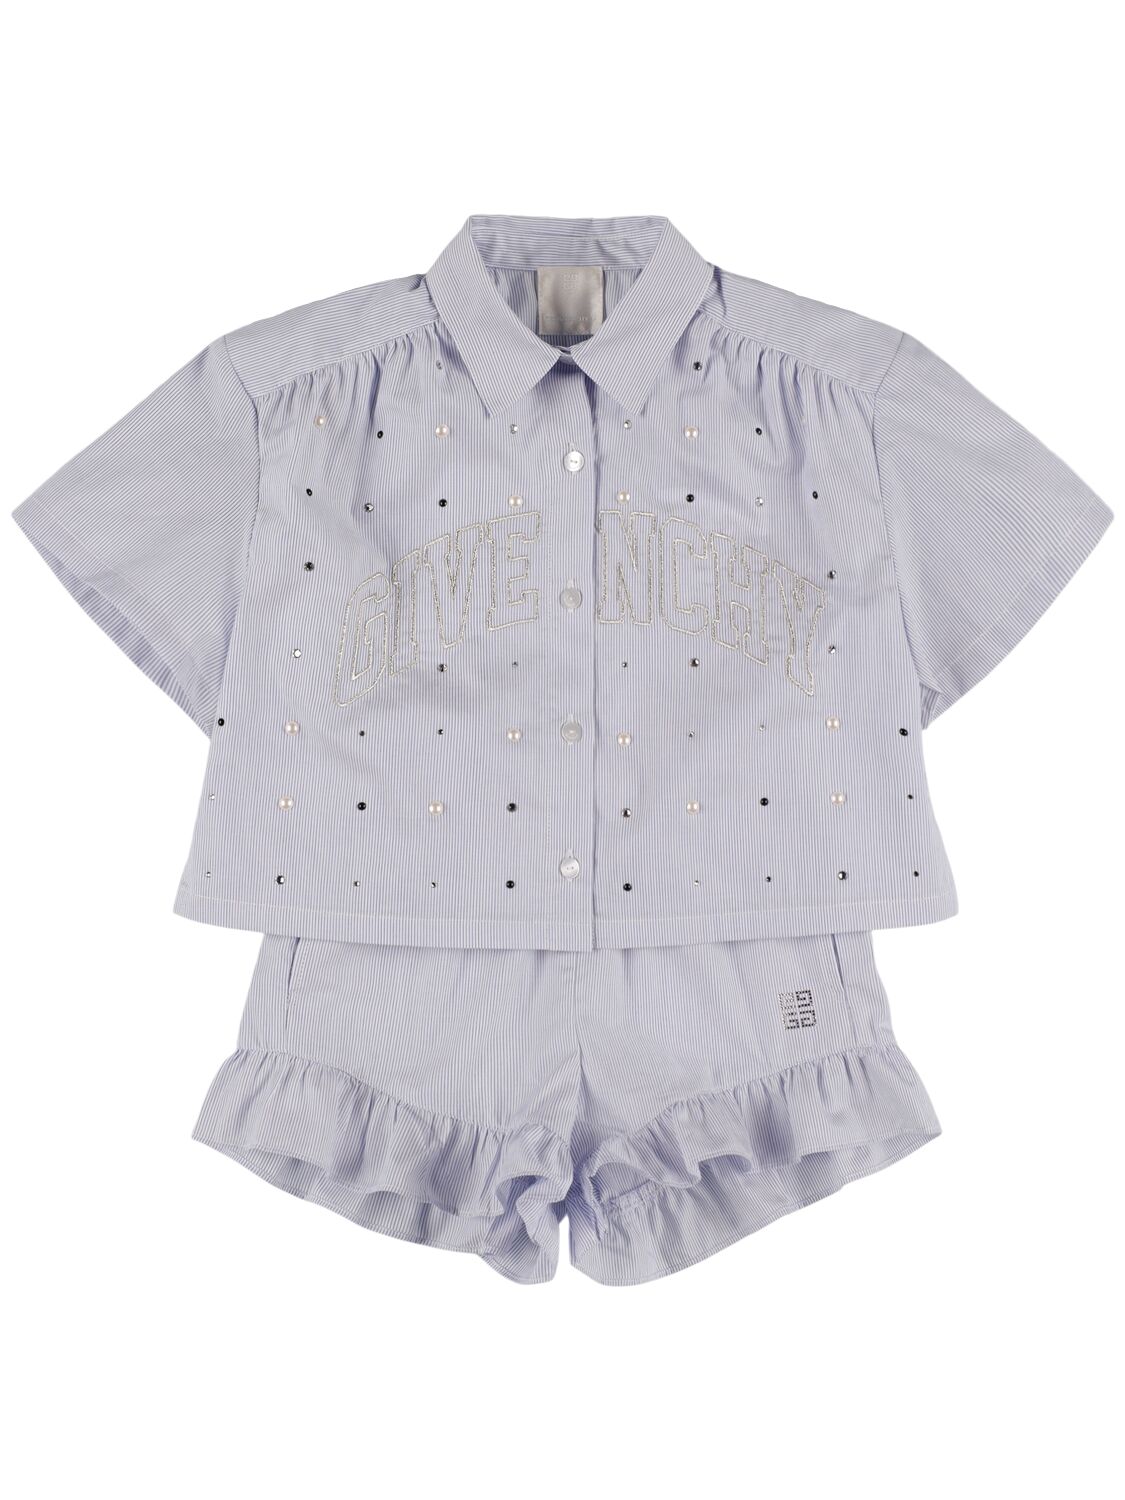 Givenchy Striped Cotton Shirt & Shorts In White/blue